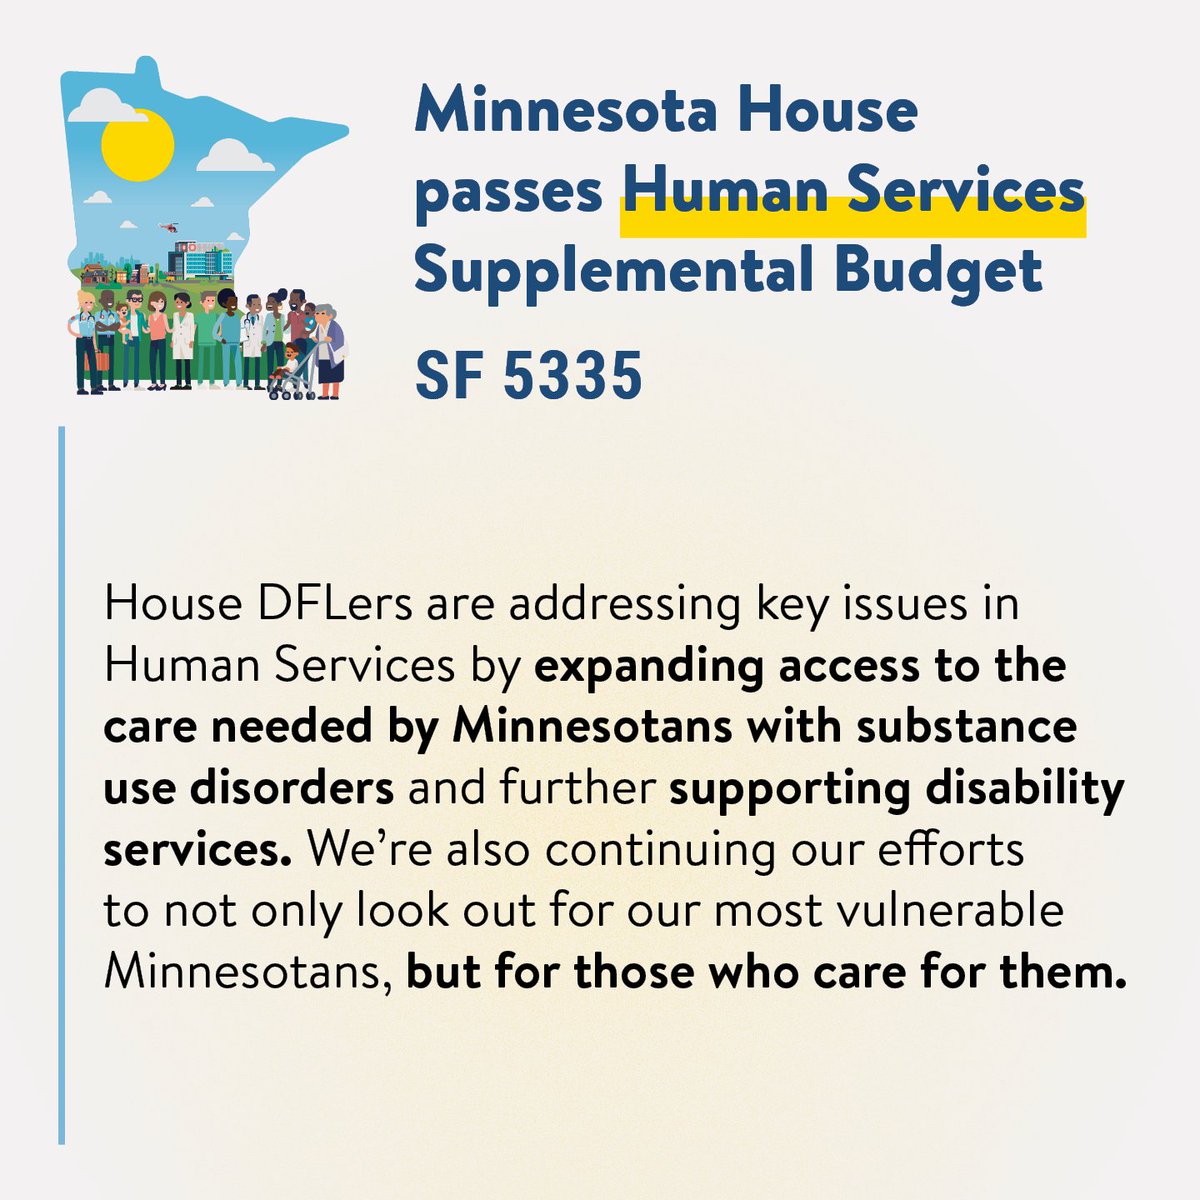 Democrats are prioritizing services for vulnerable Minnesotans while we support the dedicated folks who provide that care. The Human Services budget furthers our investments in substance use disorder treatment, services for people with disabilities, and much more. #mnleg 🤗🧠🛋️